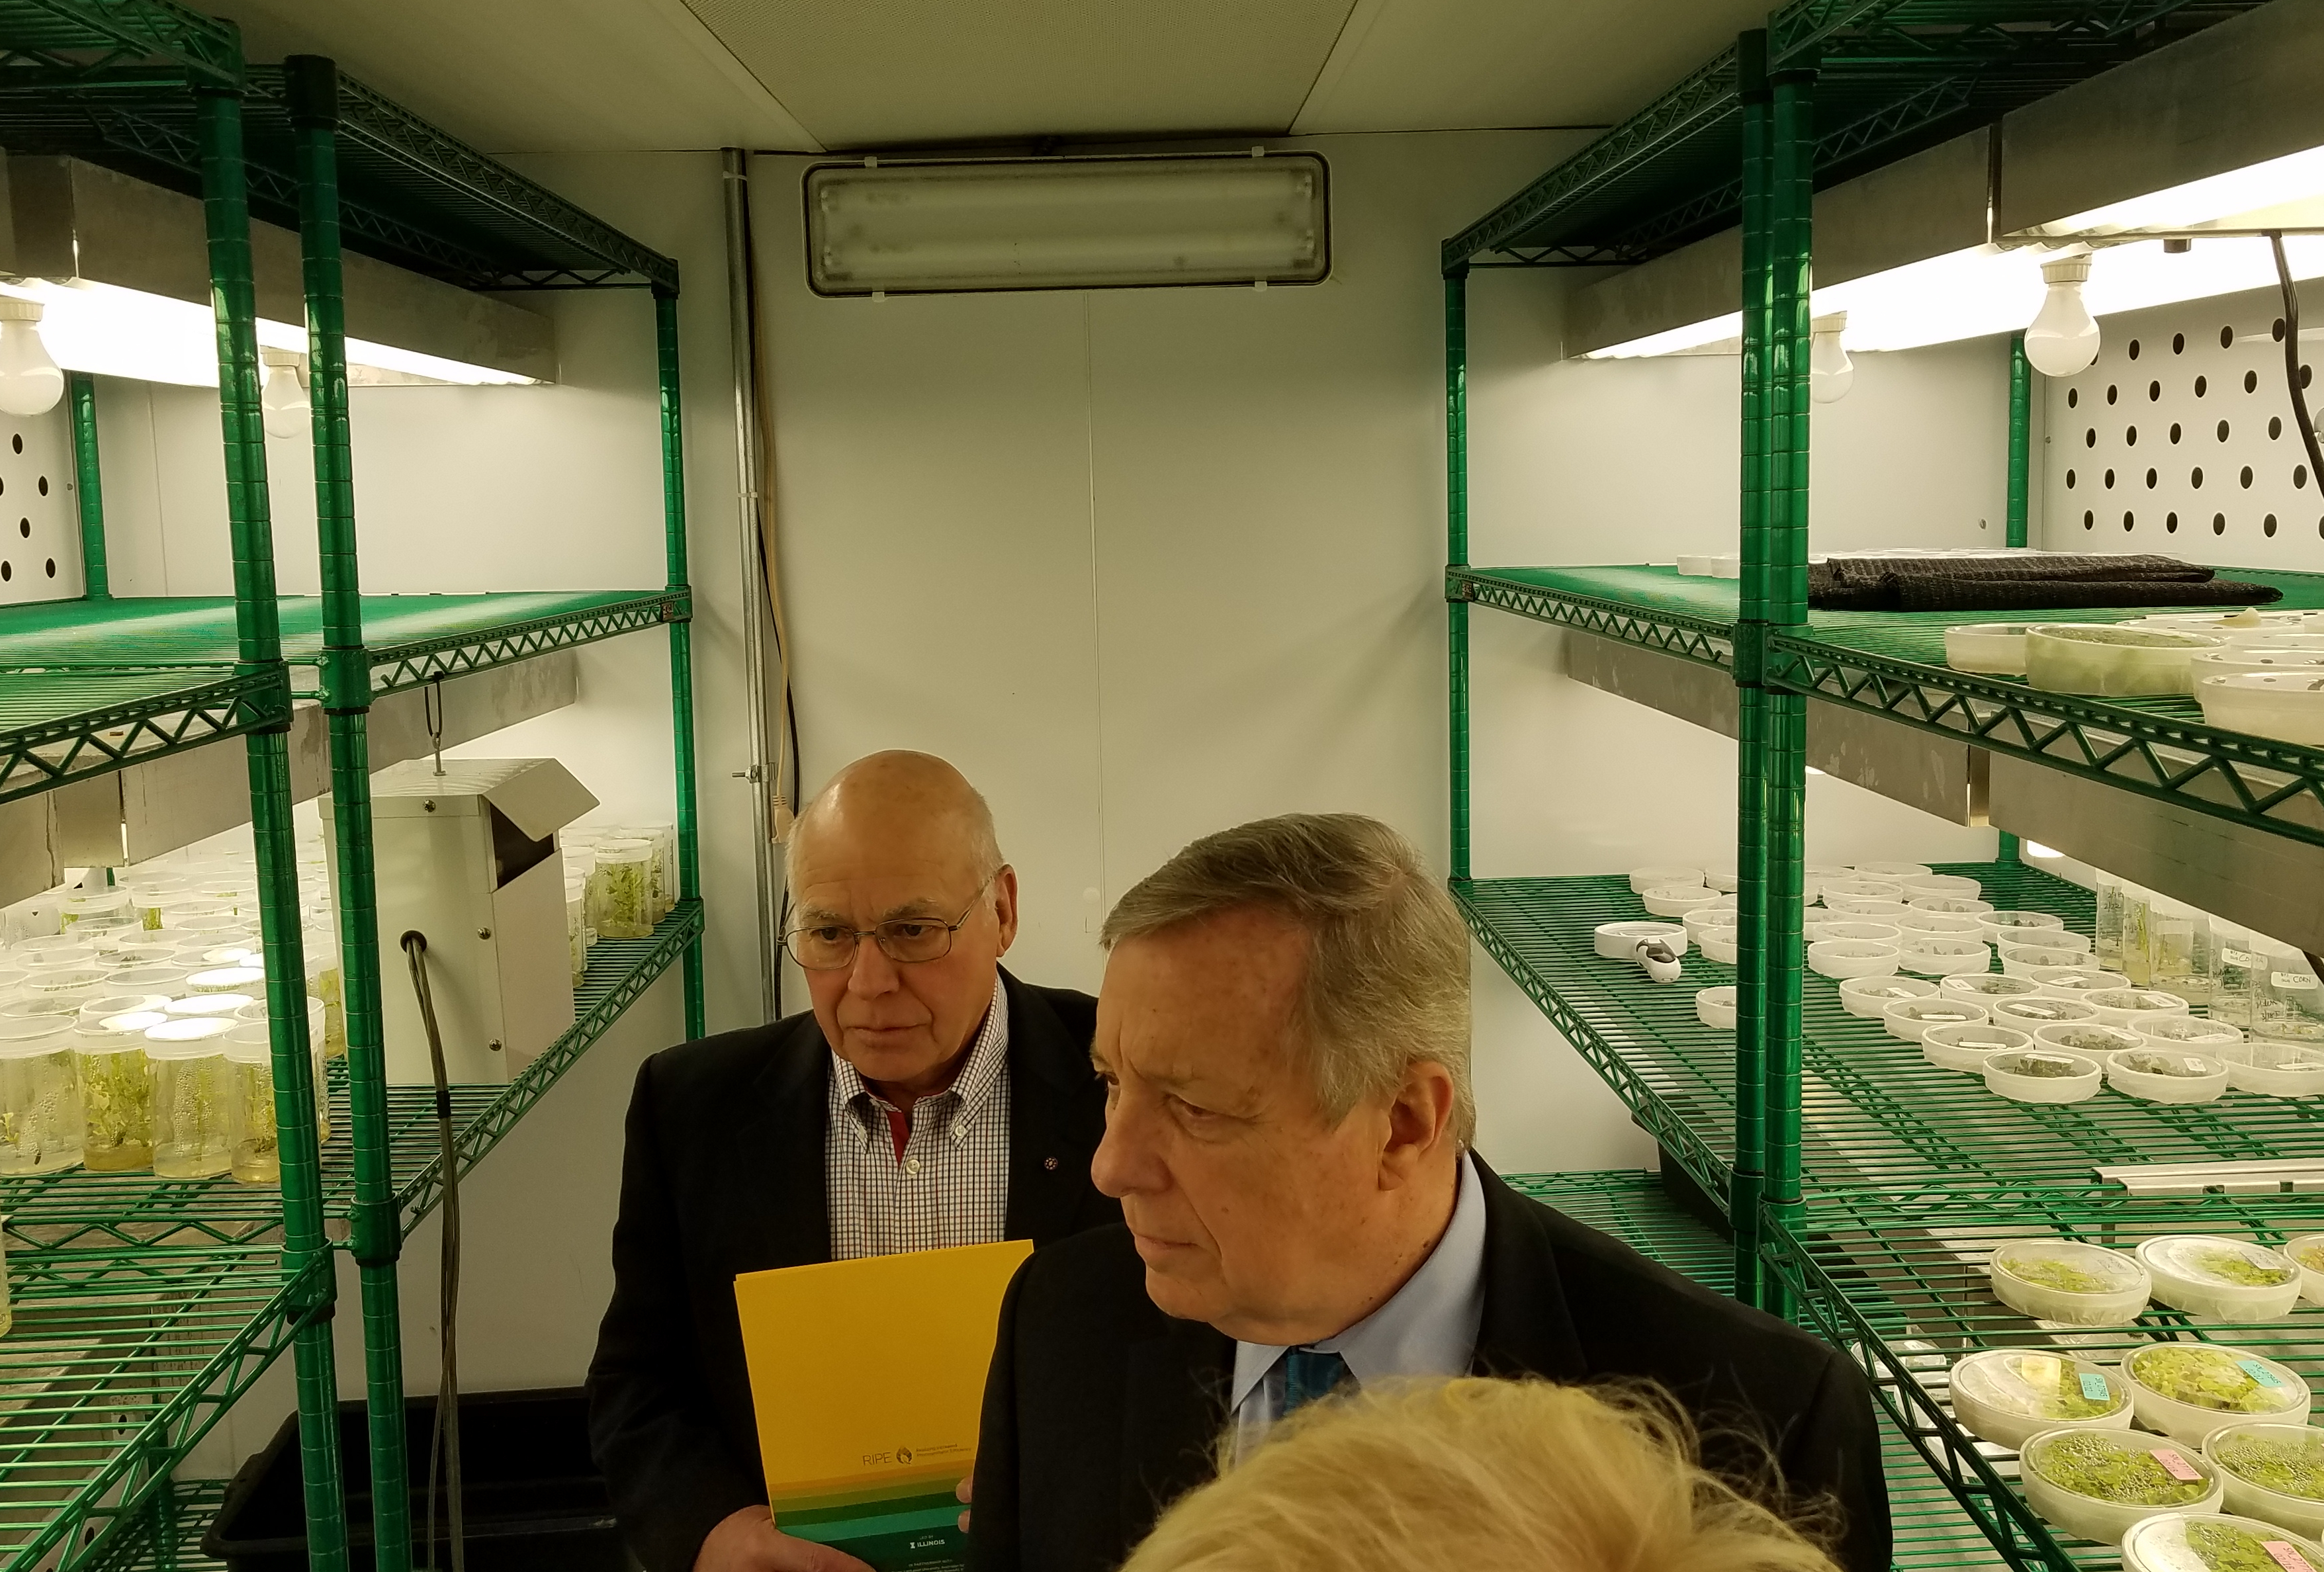 Don Ort and Dick Durbin are inside a growth chamber with shelves holding petri dishes containing small plants.